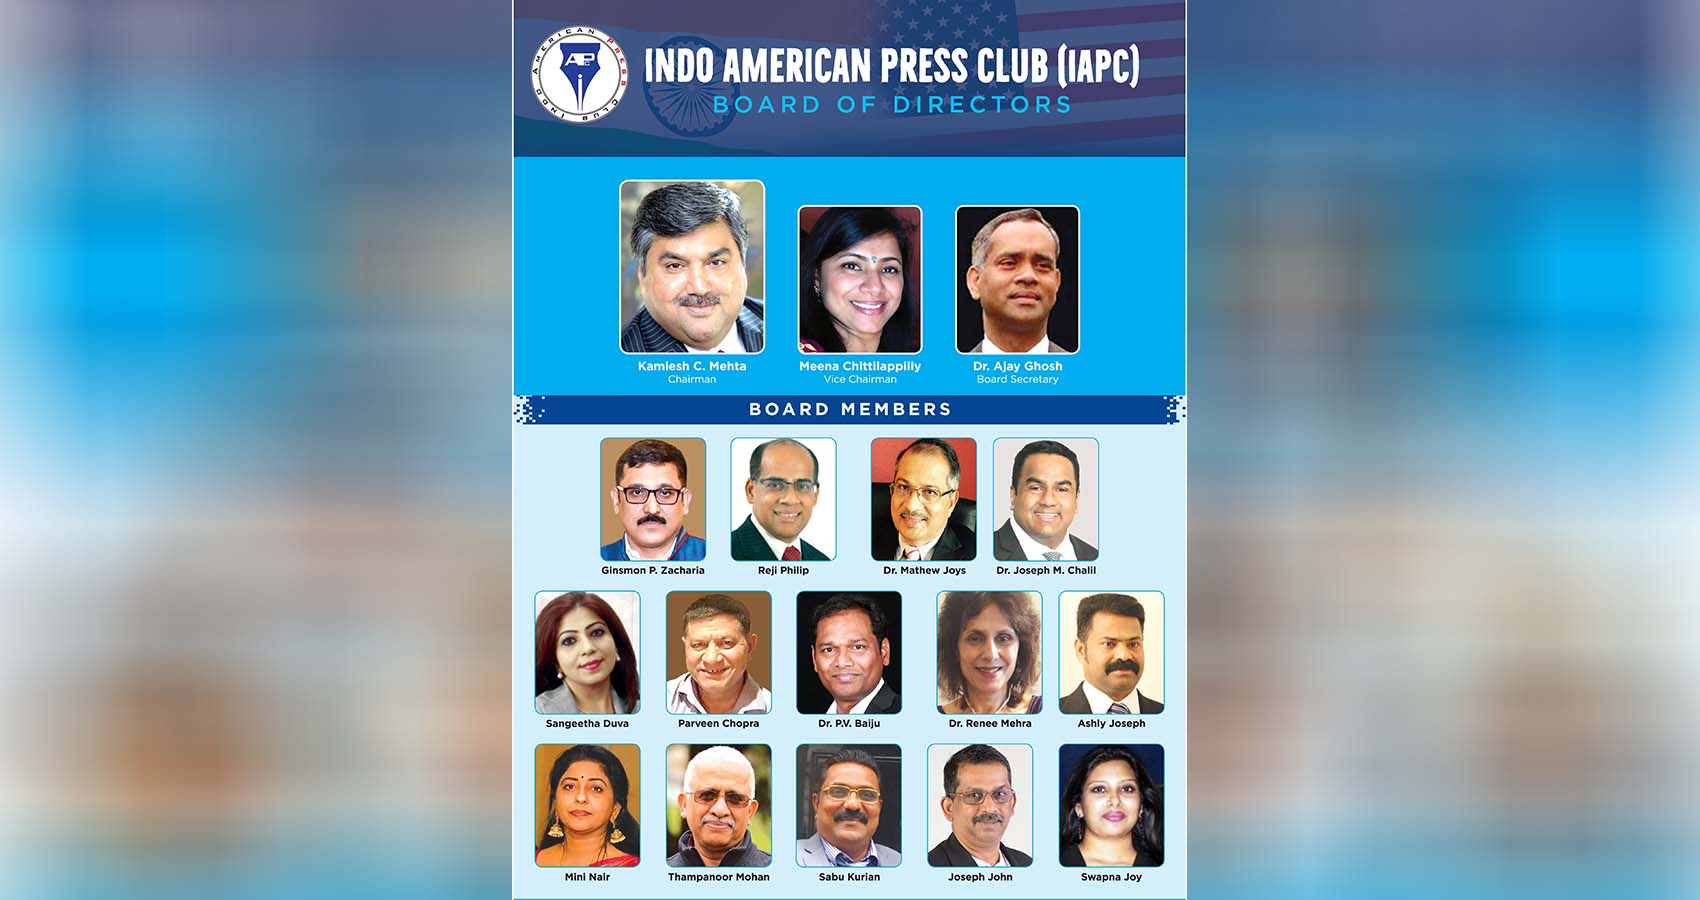 IAPC To Hold Induction Ceremony Of The New Board Of Directors And National Executive Committee On May 21, 2022 At Indian Consulate In New York